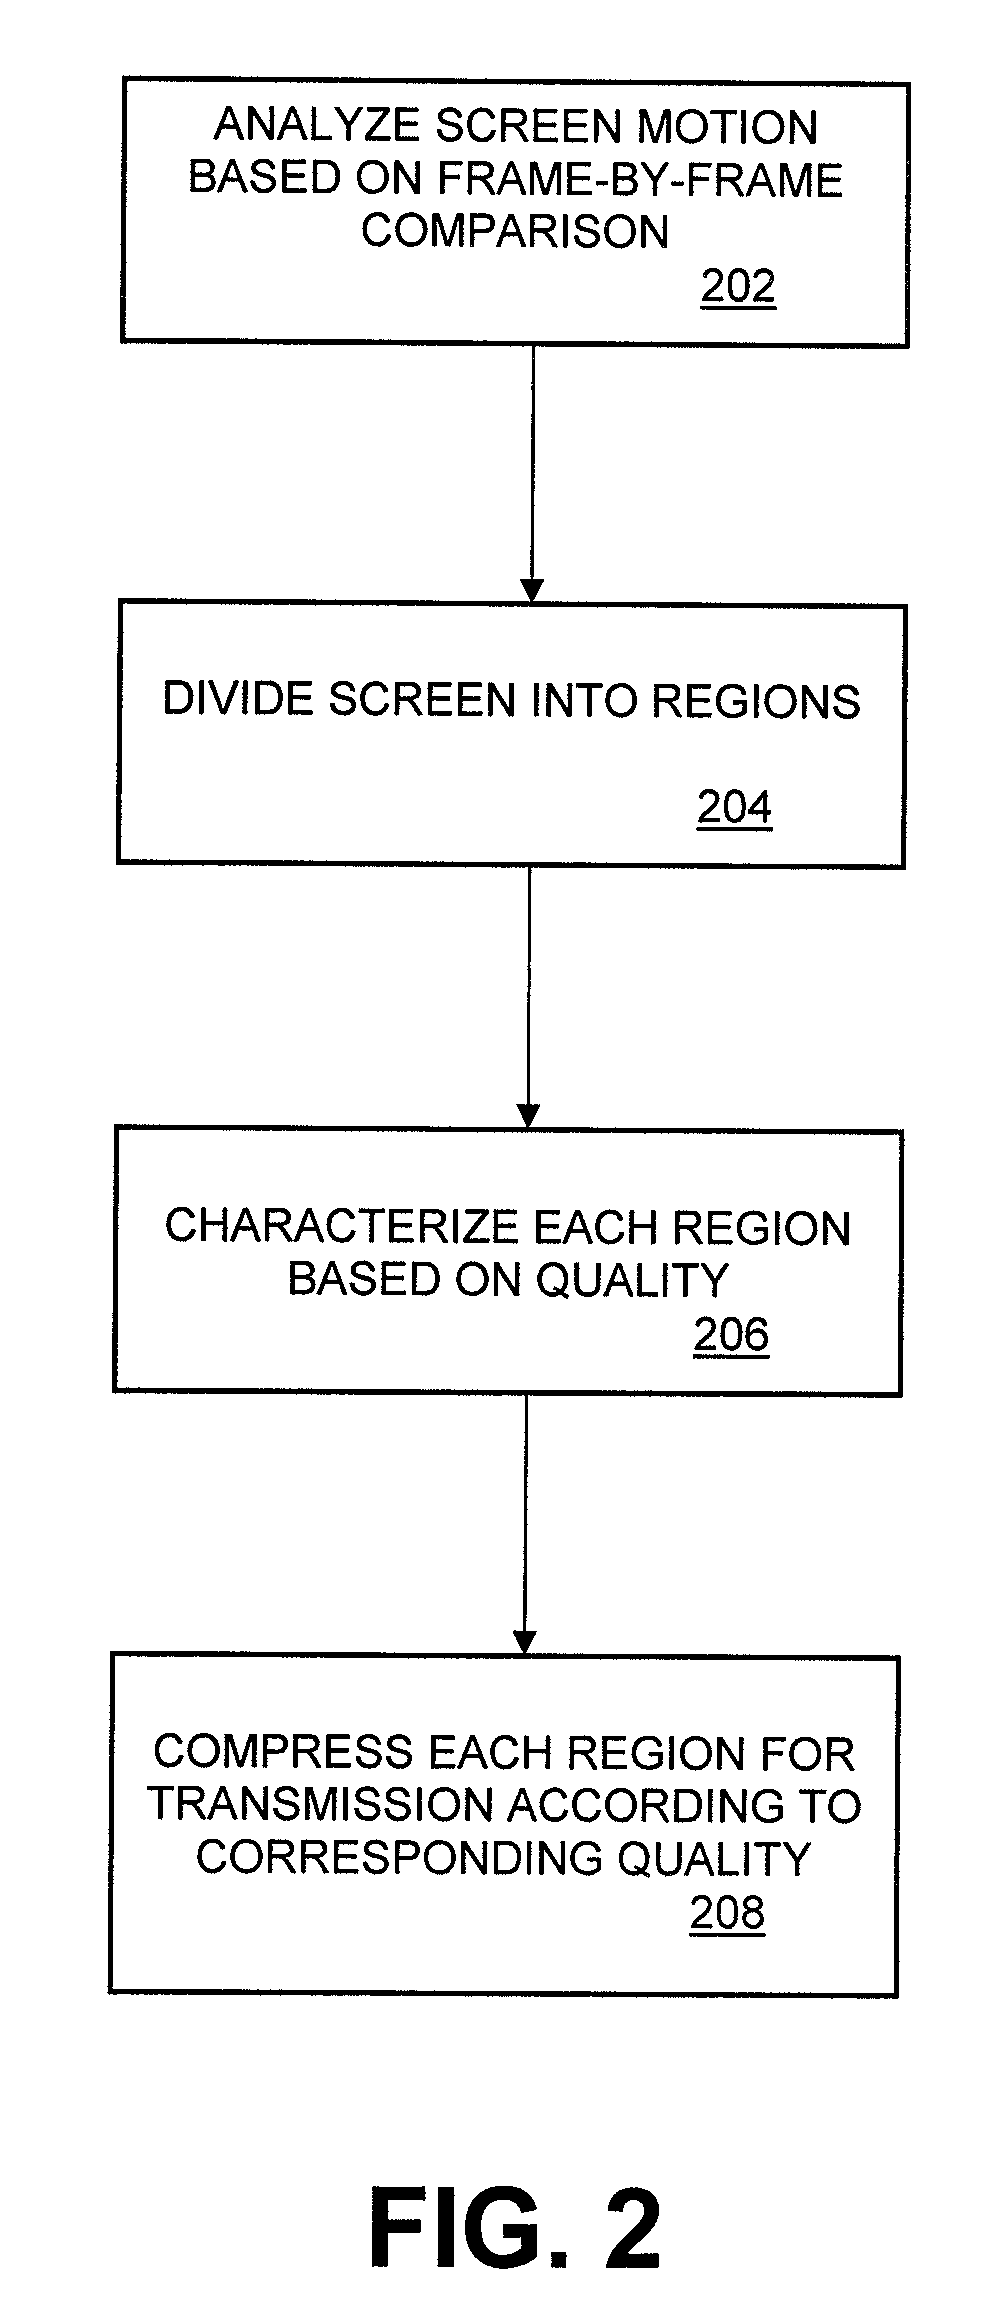 Remote Transmission and Display of Video Data Using Standard H.264-Based Video Codecs